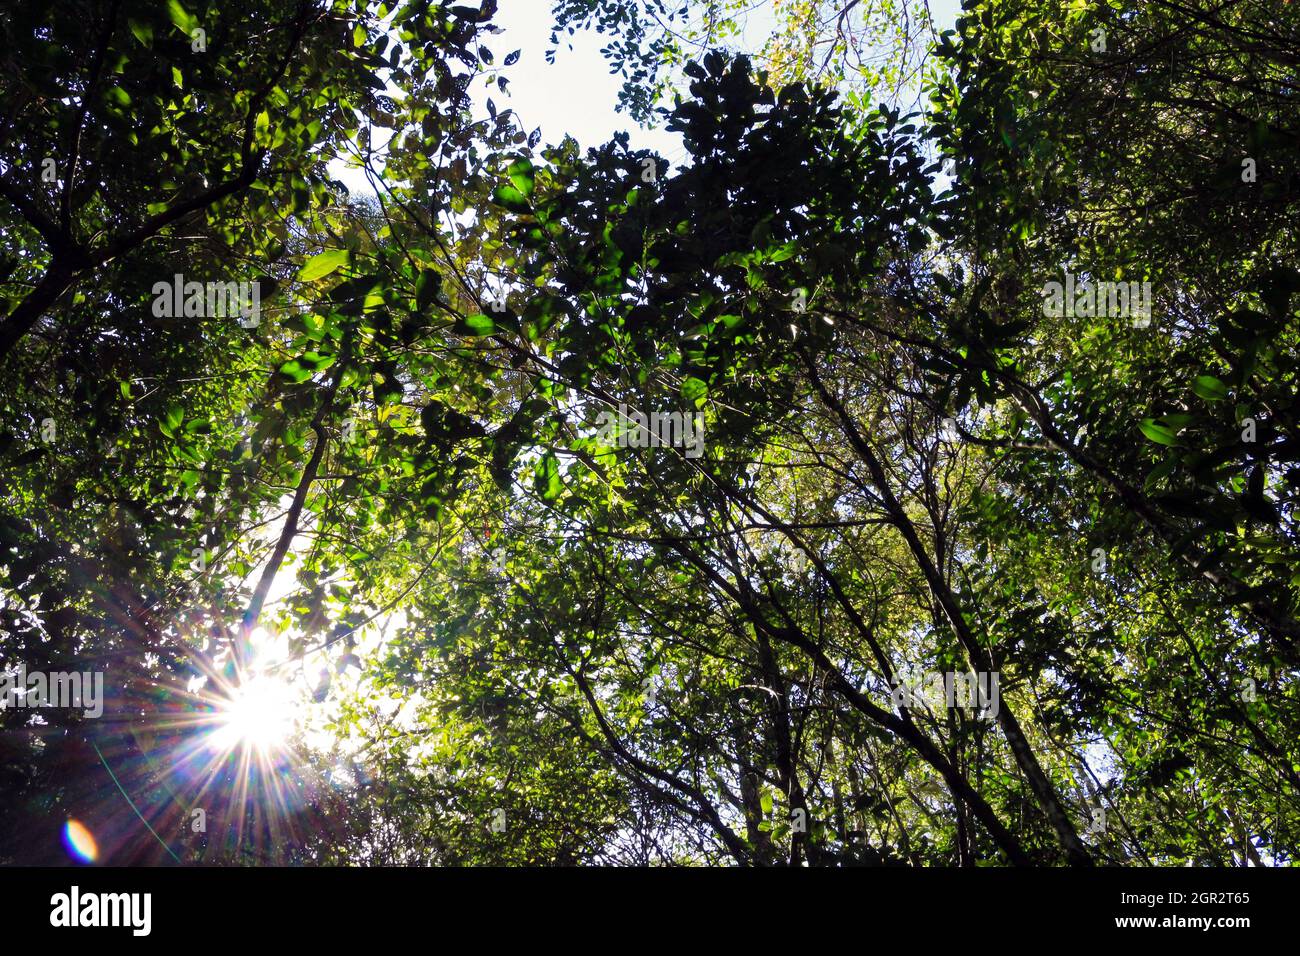 The treetops of Mata Atlantica. The search for light in the rainforest. Stock Photo